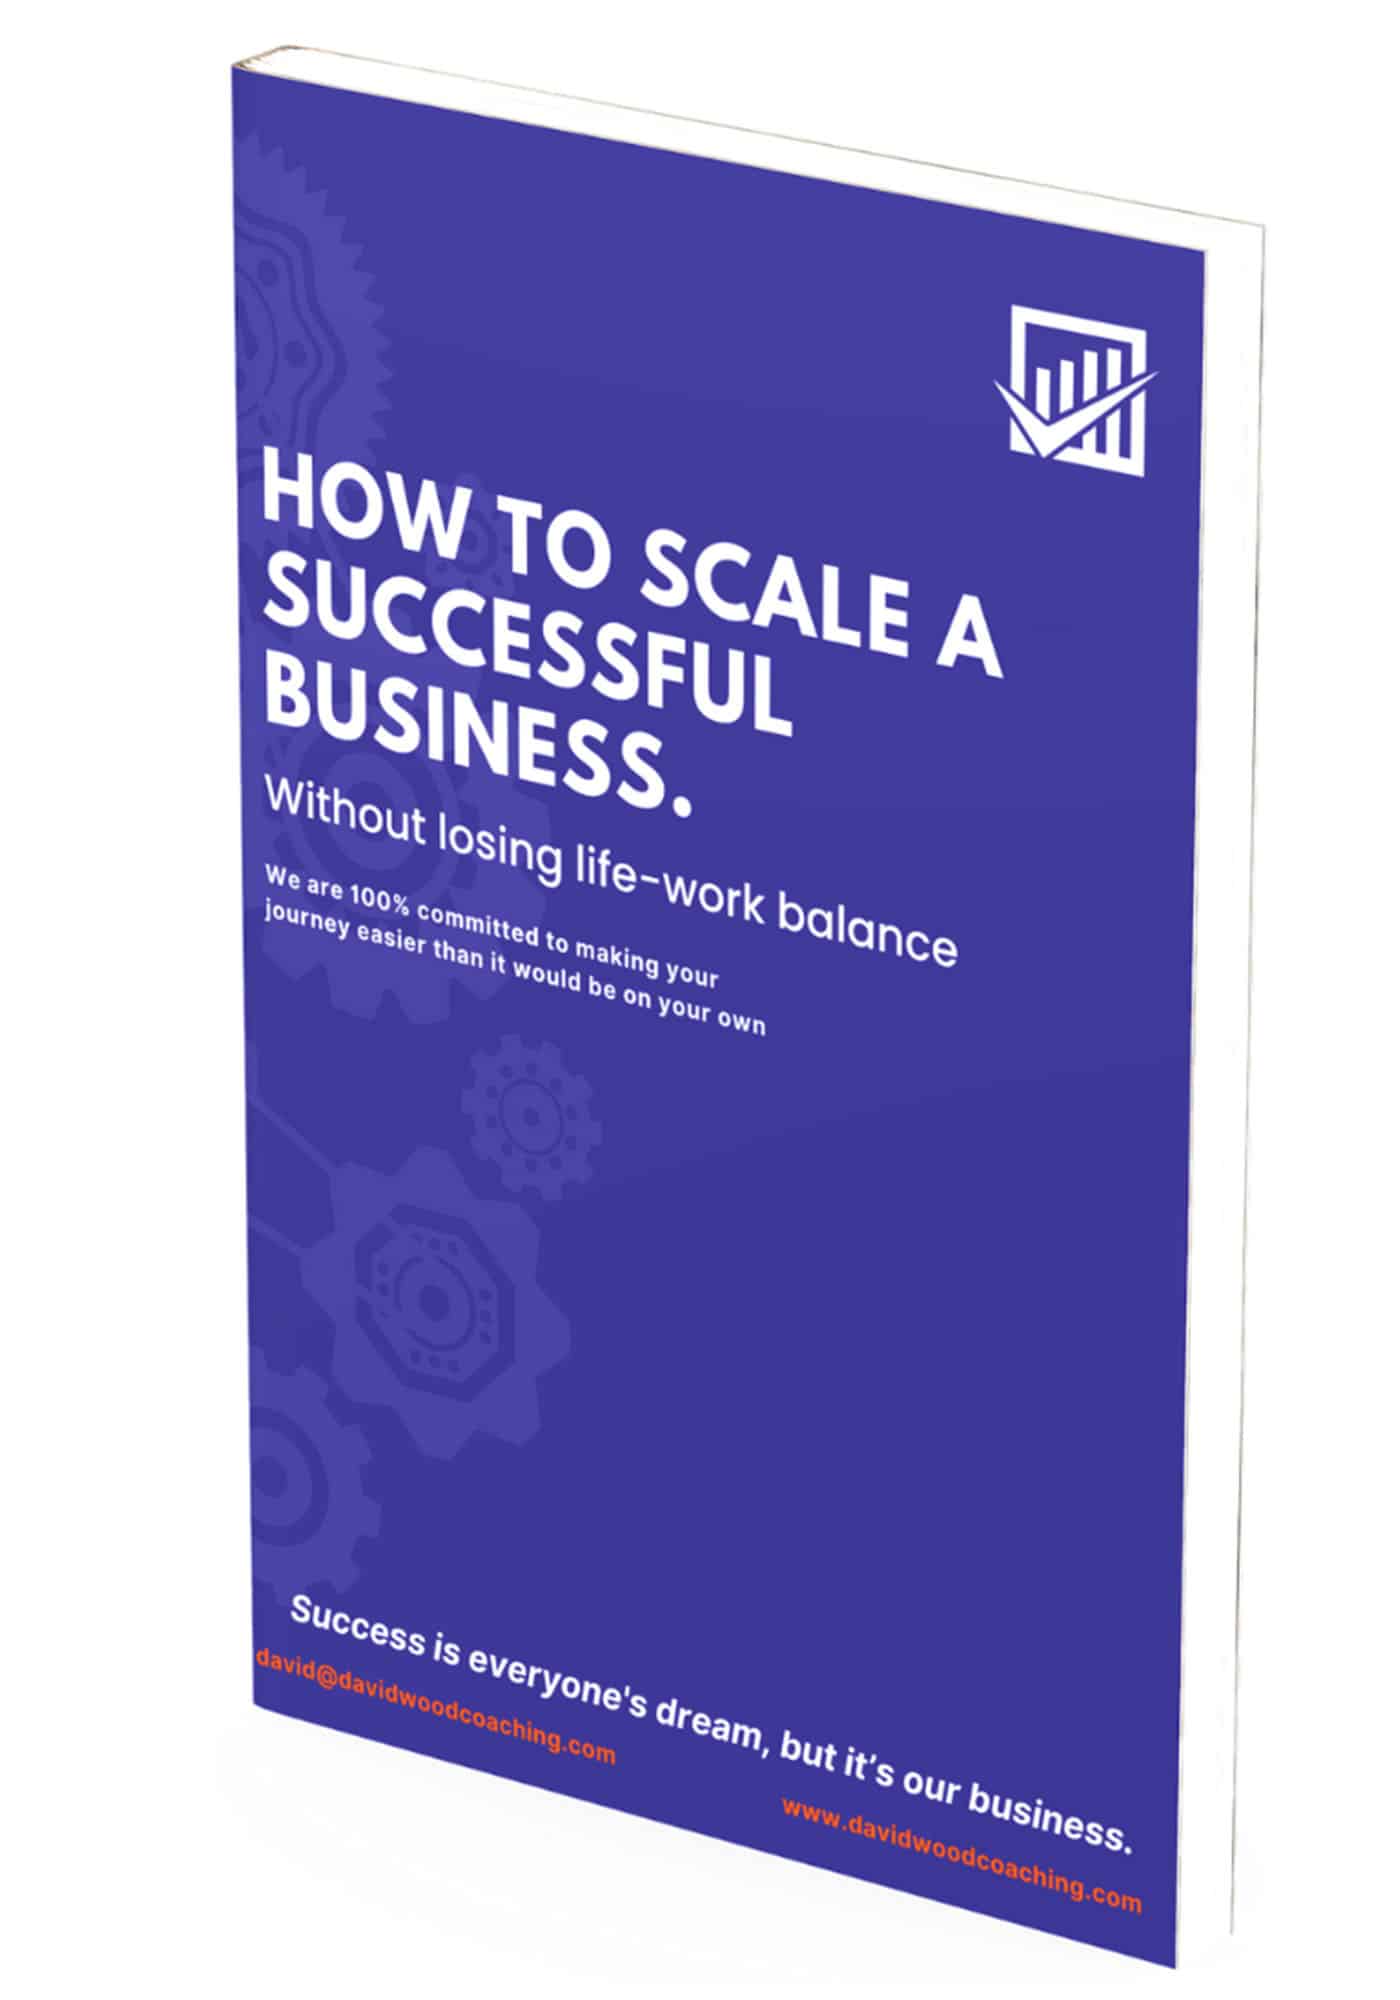 How to scale a successful business